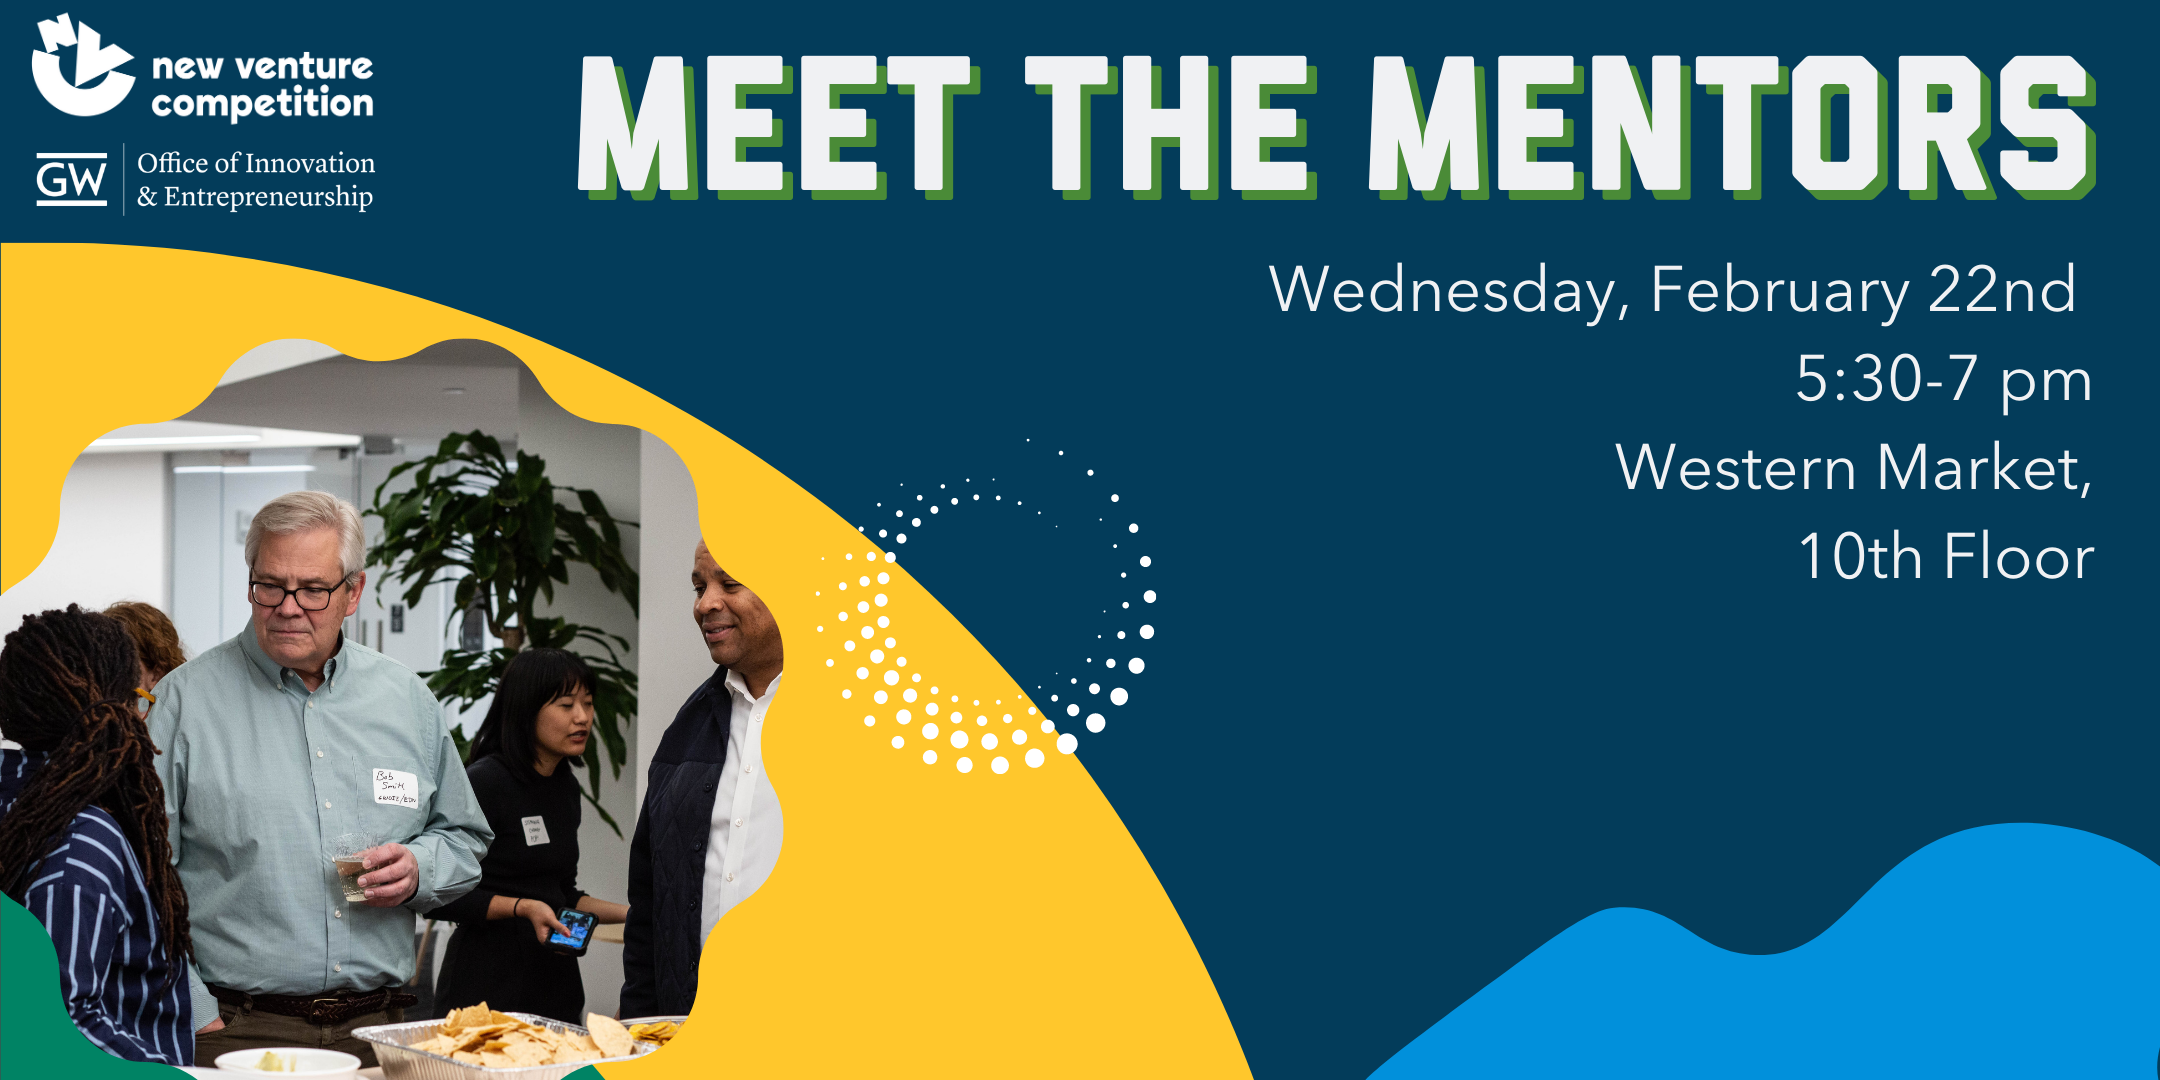 Promotional event graphic including an image with three people networking.